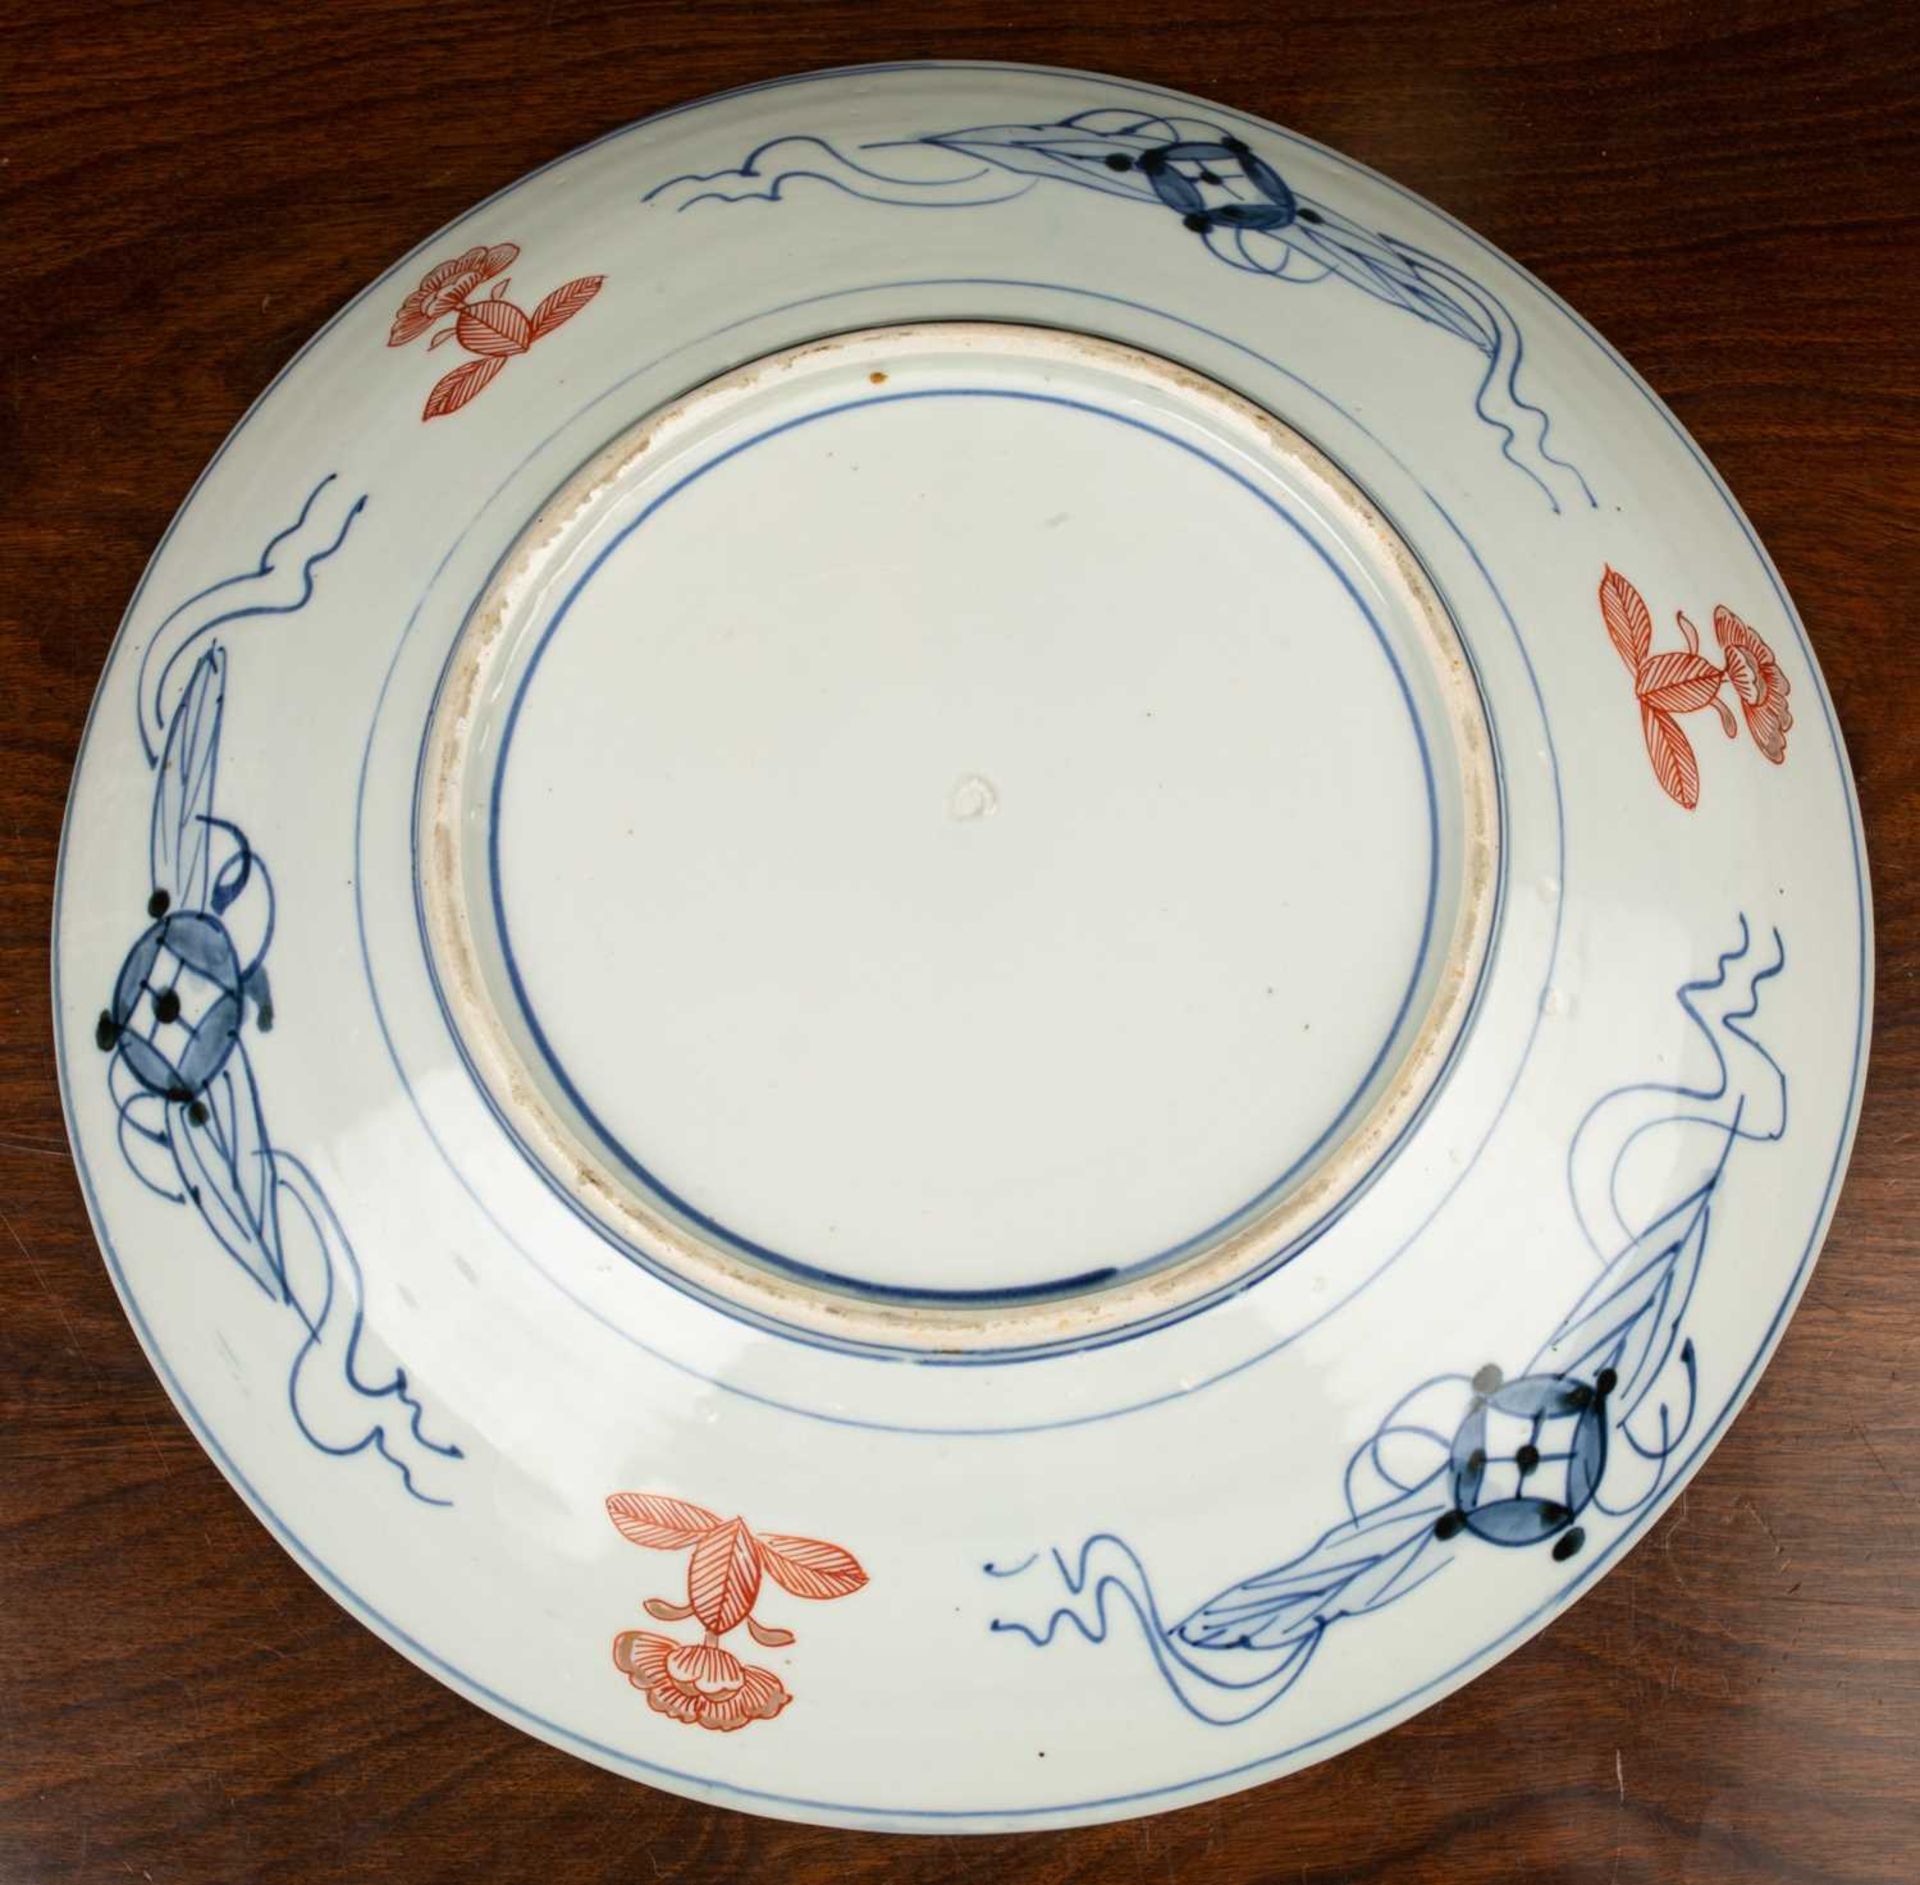 A 19th century Japanese charger, with central stylised flower medallion surrounded by panels of - Image 2 of 2